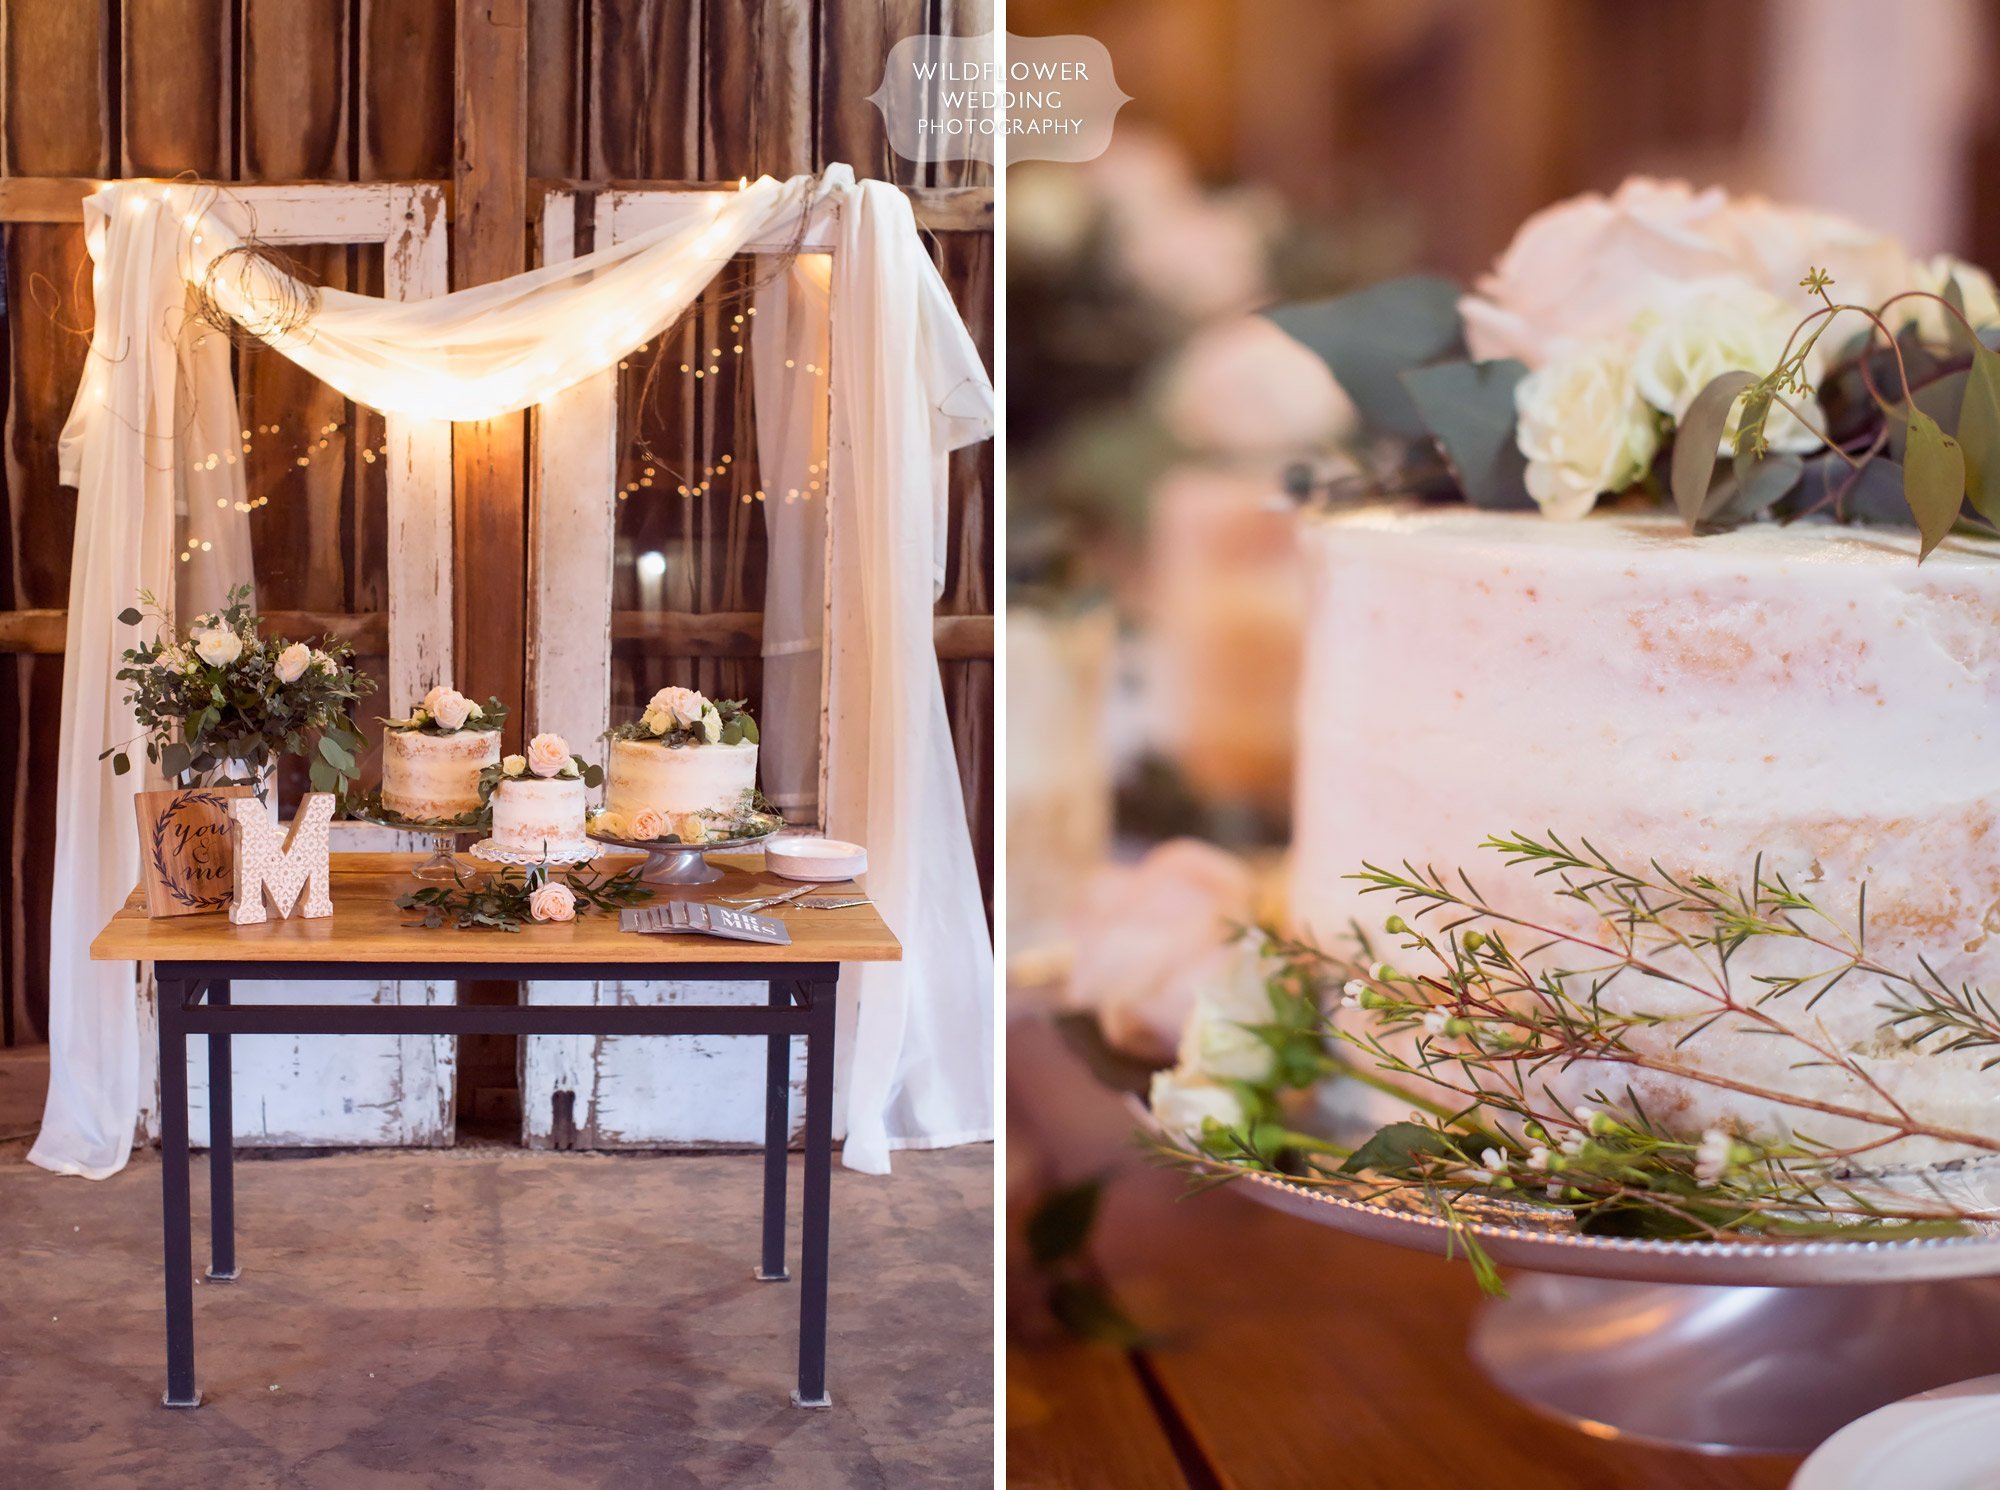 Naked wedding cakes on display with romantic lace and twinkle lights at this barn wedding at Kempker's Back 40 in southern MO.